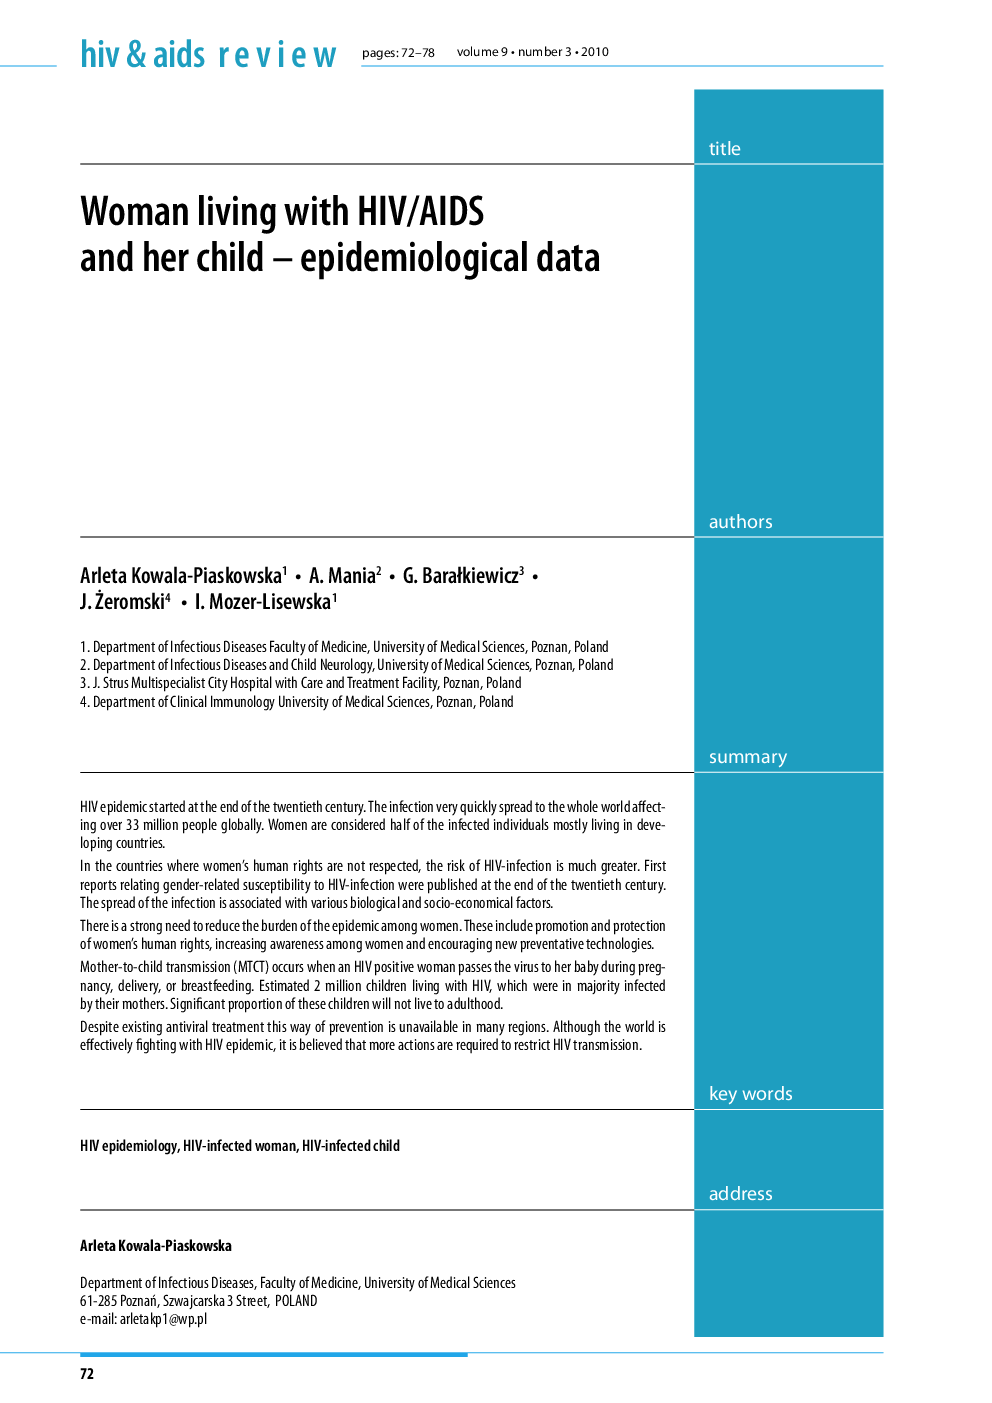 Woman living with HIV/AIDS and her child – epidemiological data